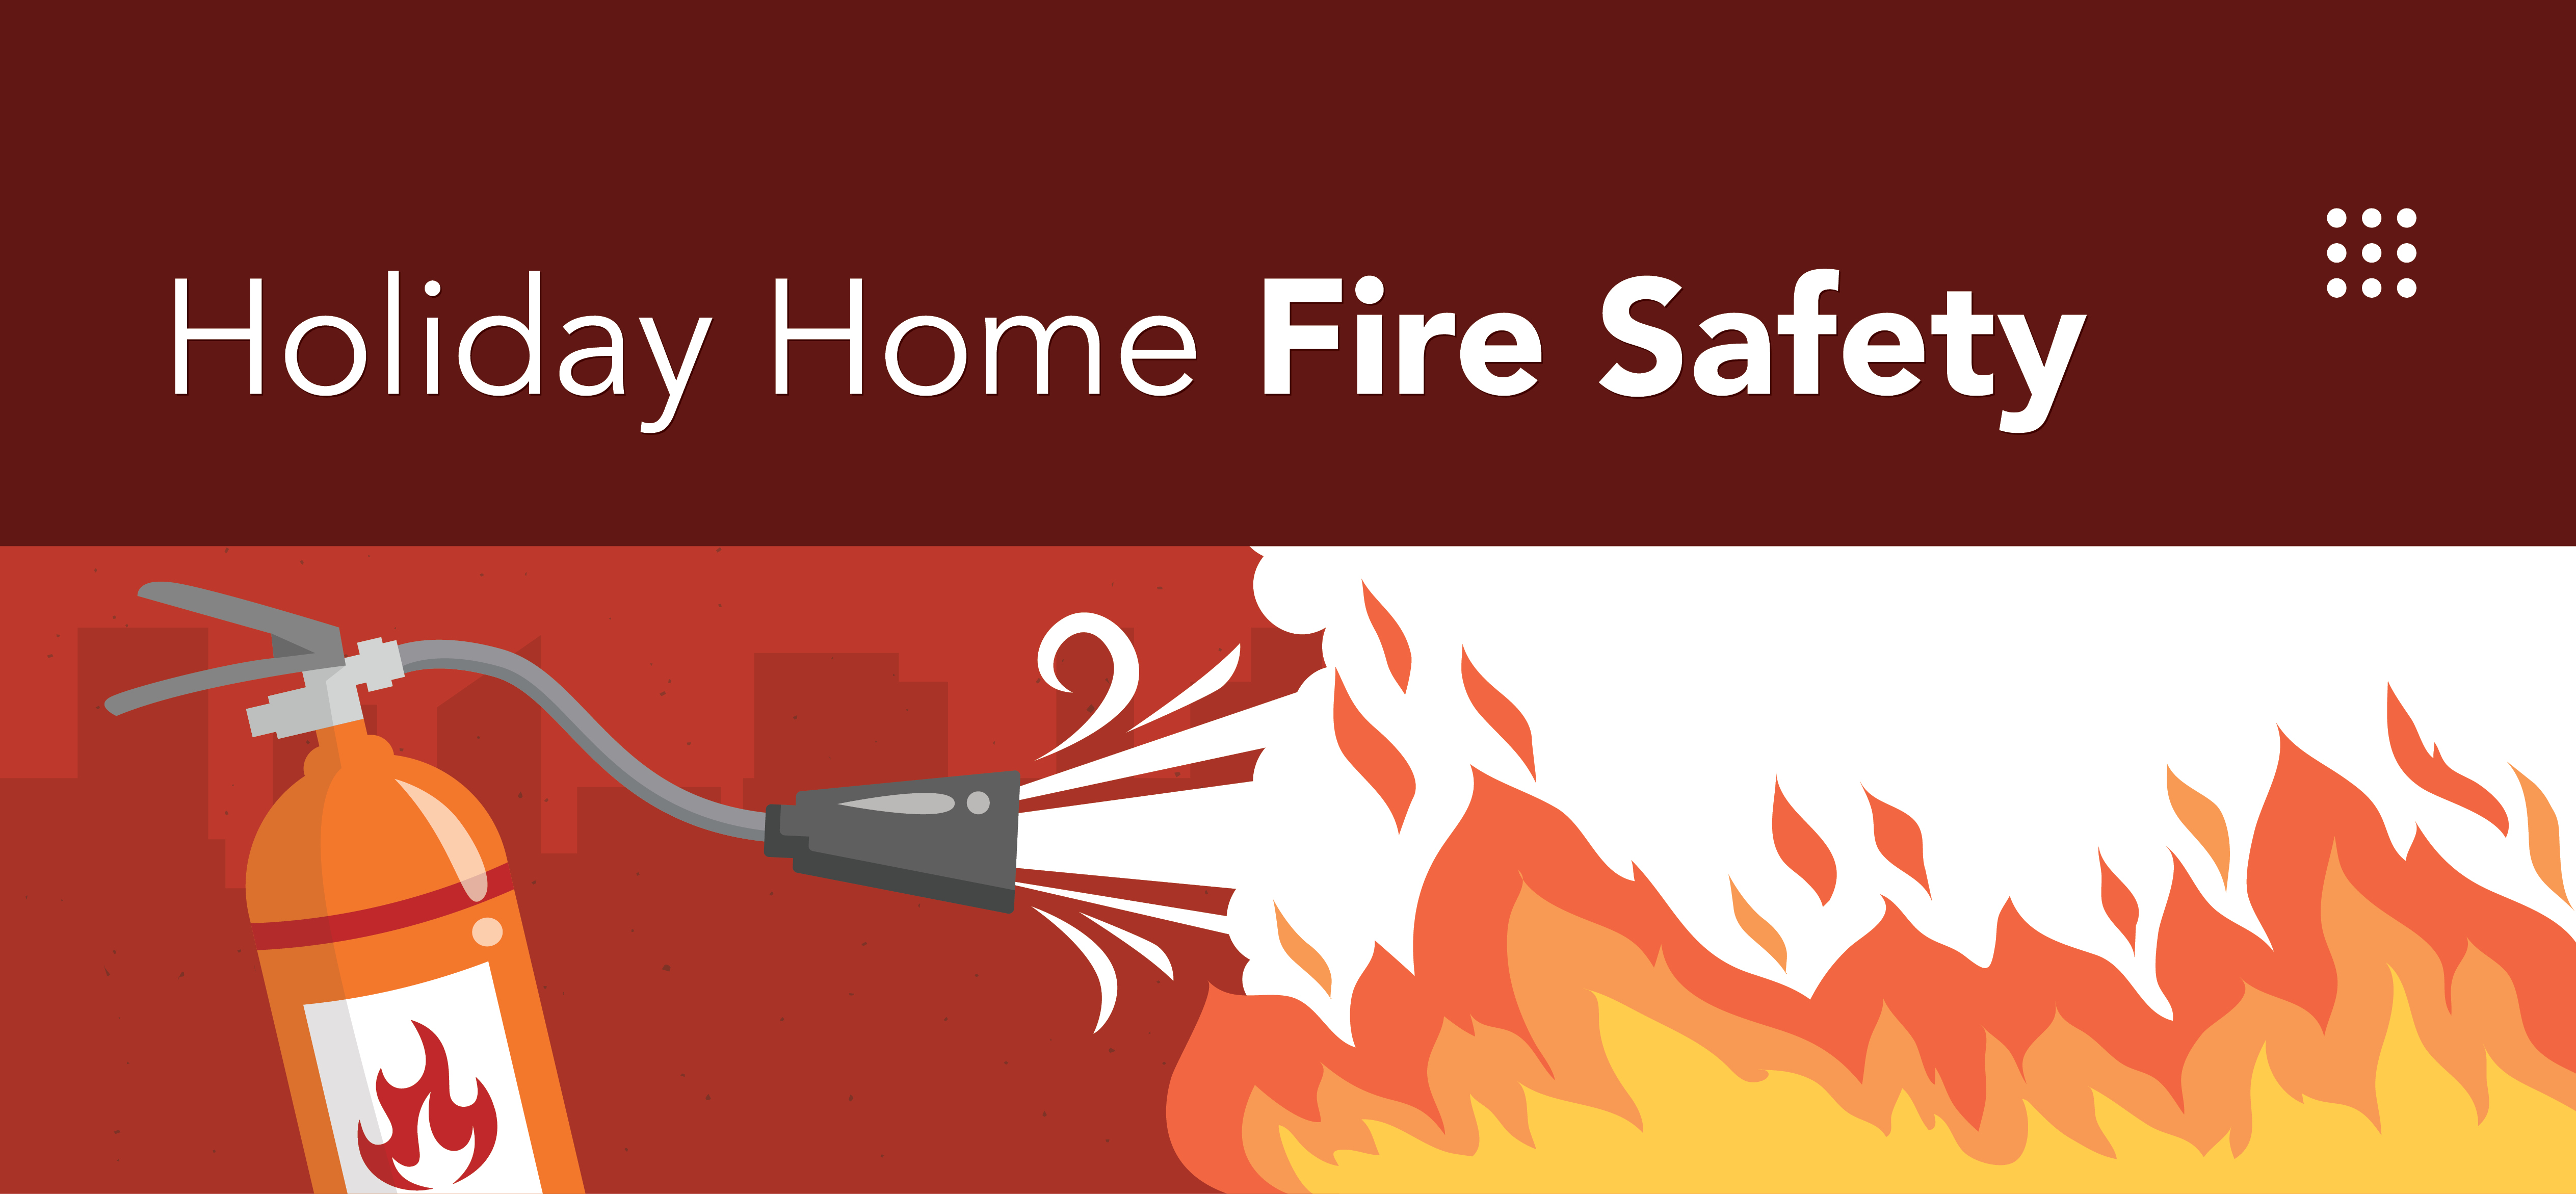 Holiday Home Fire Safety